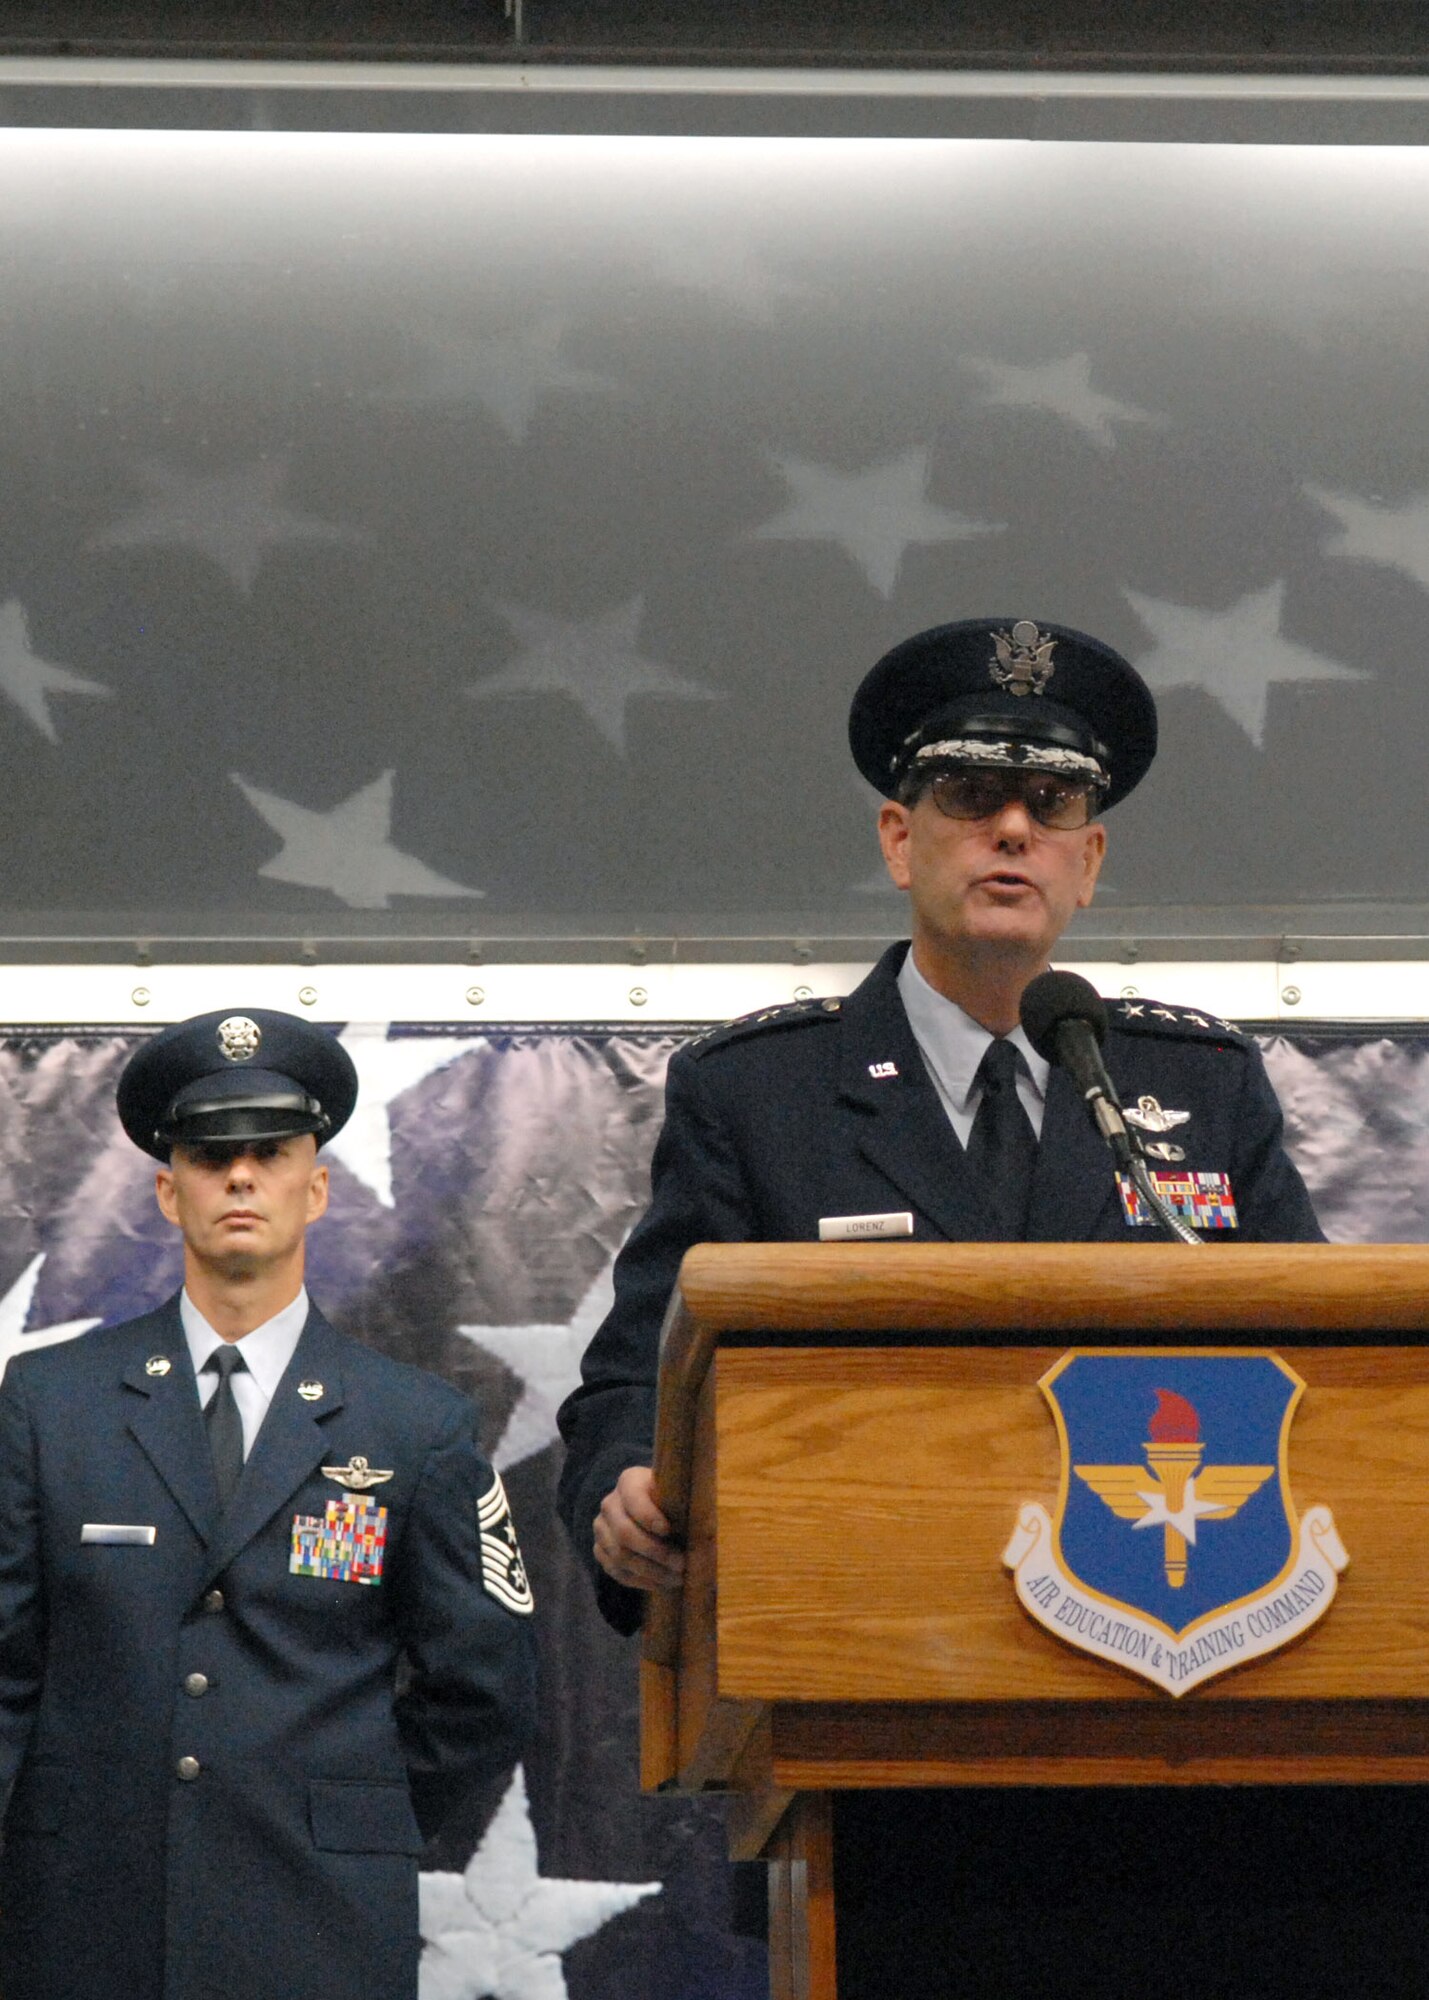 Gen. Stephen R. Lorenz addresses the crowd after assuming command of Air Education and Training Command July 2 at Randolph Air Force Base, Texas. He replaced Gen. William R. Looney III, who retired during the ceremony. (U.S. Air Force photo/Rich McFadden) 